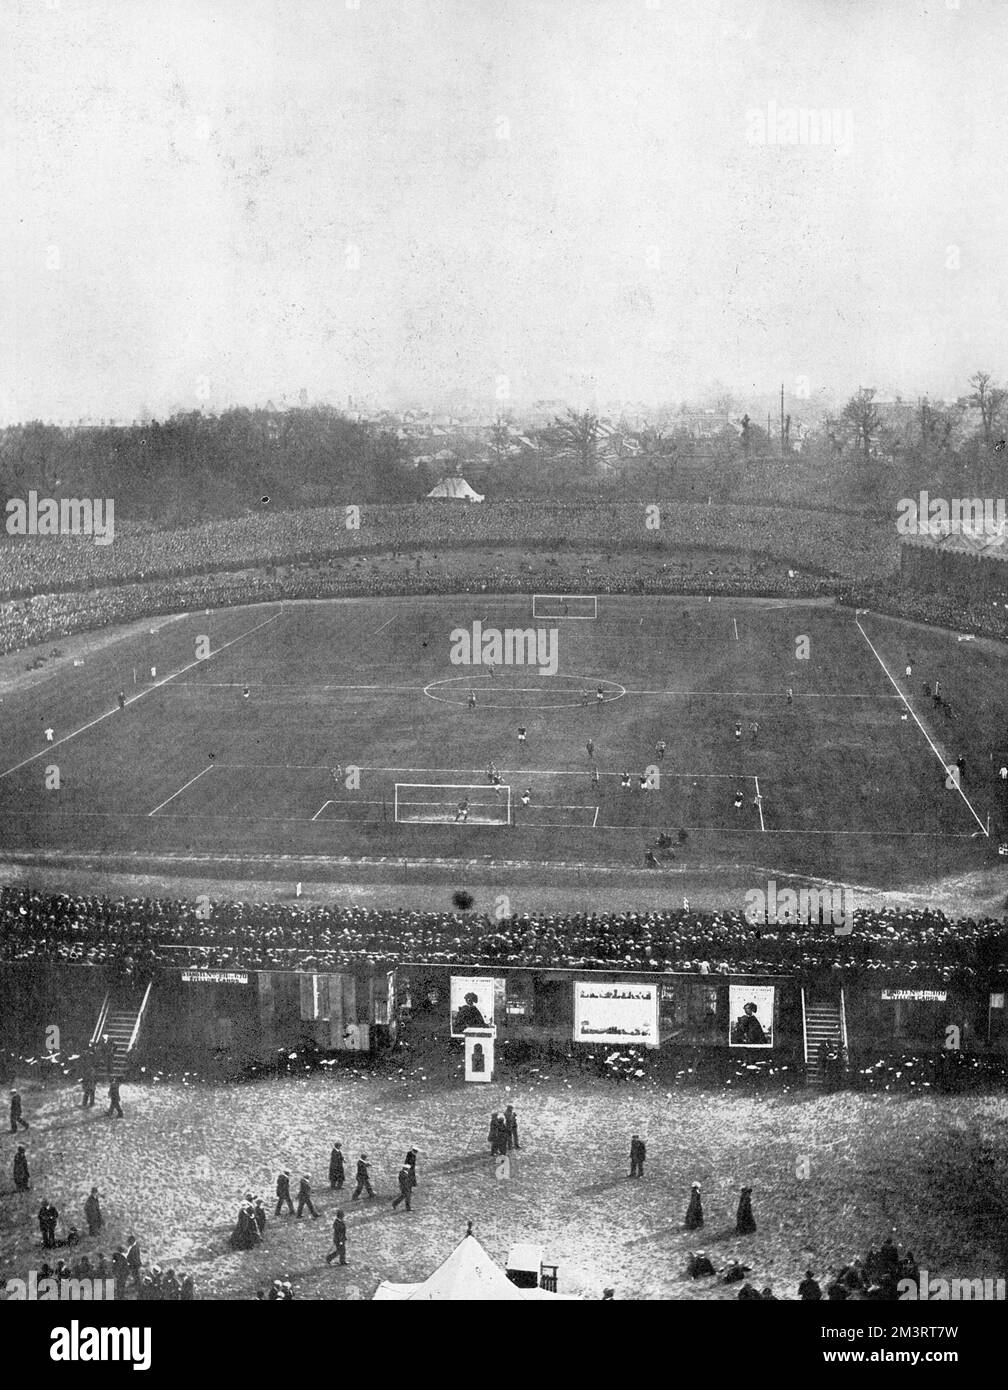 FA Cup final at the Crystal Palace between Newcastle United and Bradford City. It ended a goalless draw, and was replayed at Old Trafford which was won by Bradford City.     Date: 1911 Stock Photo